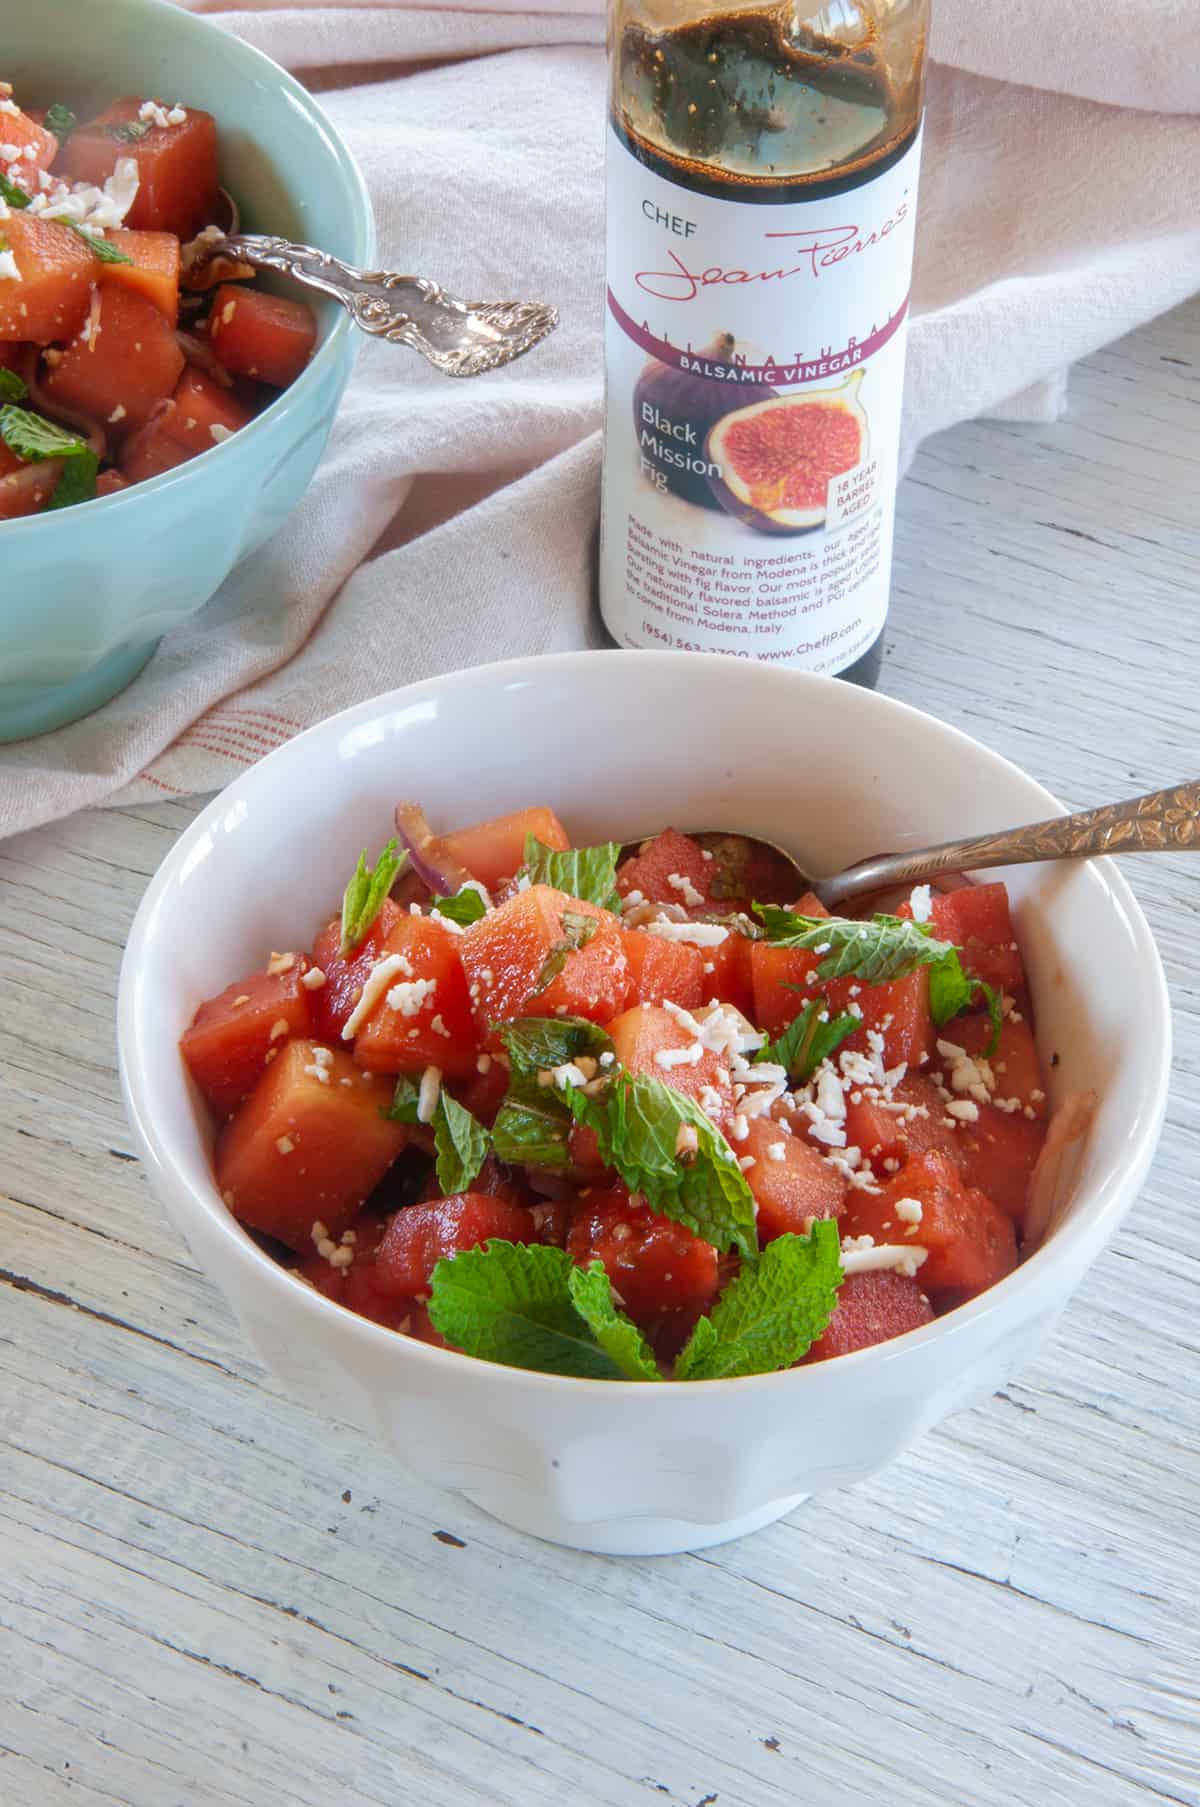 Bowl of watermelon feta salad and a jar of Black Mission Fig balsamic vinegar in the background.